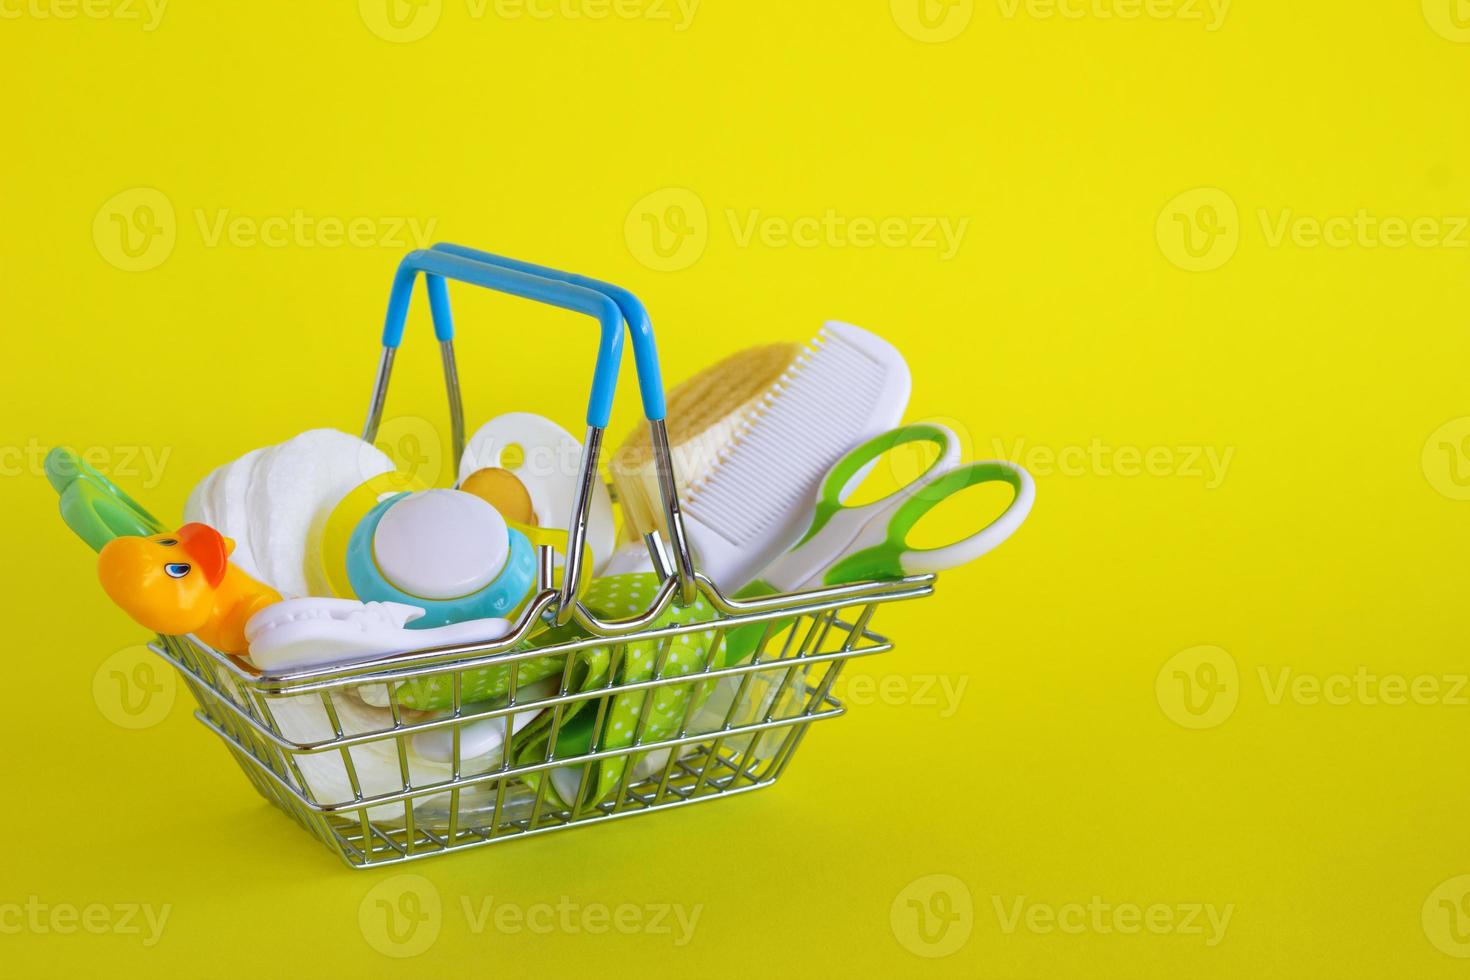 Shopping basket with baby care items - scissors, hairbrushes, pacifiers, thermometer, cotton pads, pacifier holders and nasal aspirator - on yellow background. photo